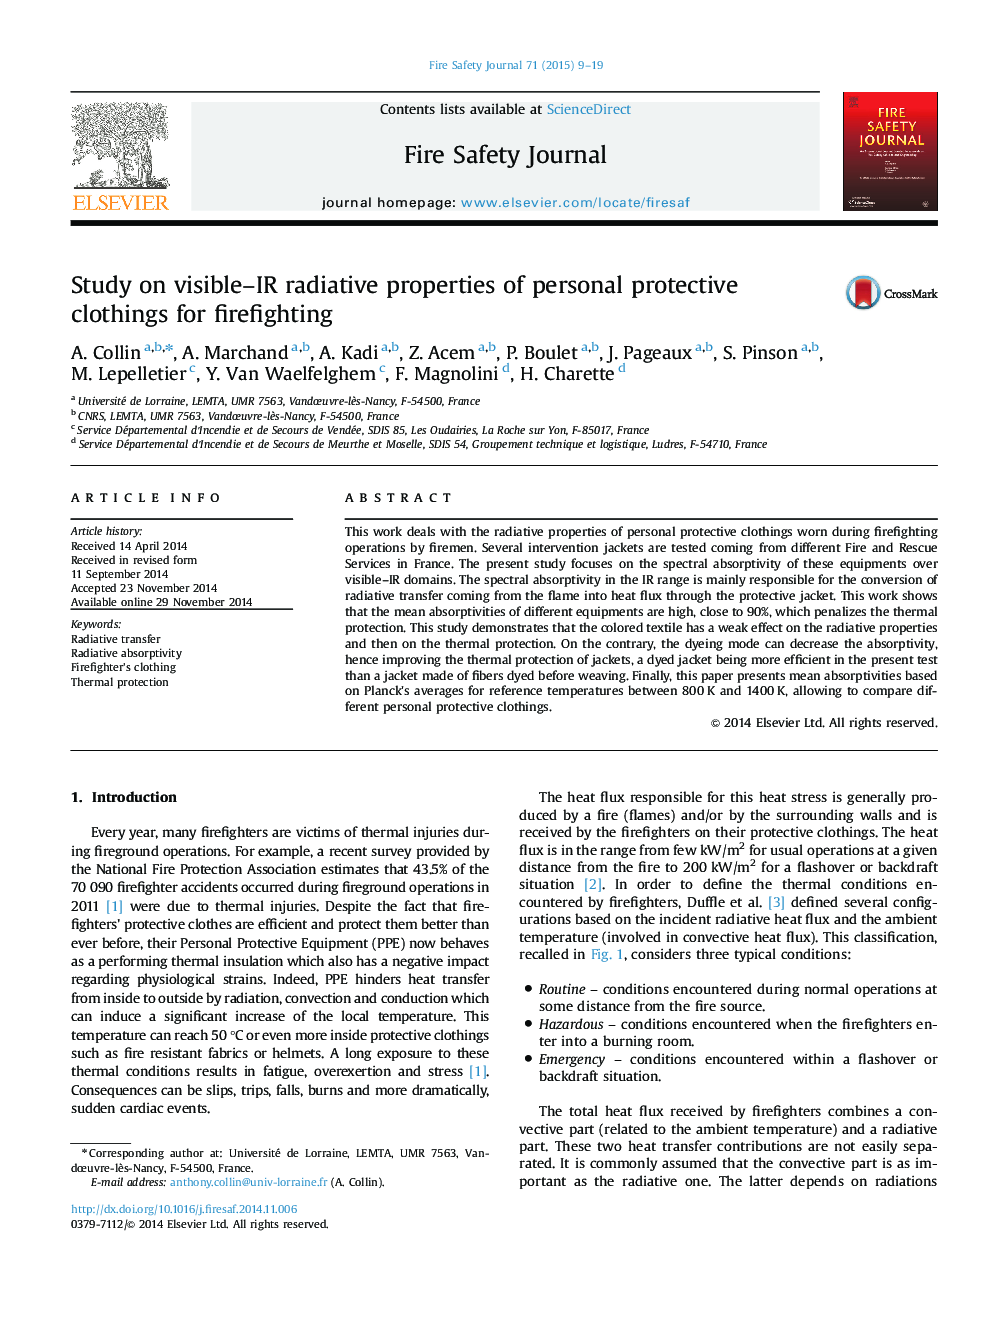 Study on visible–IR radiative properties of personal protective clothings for firefighting